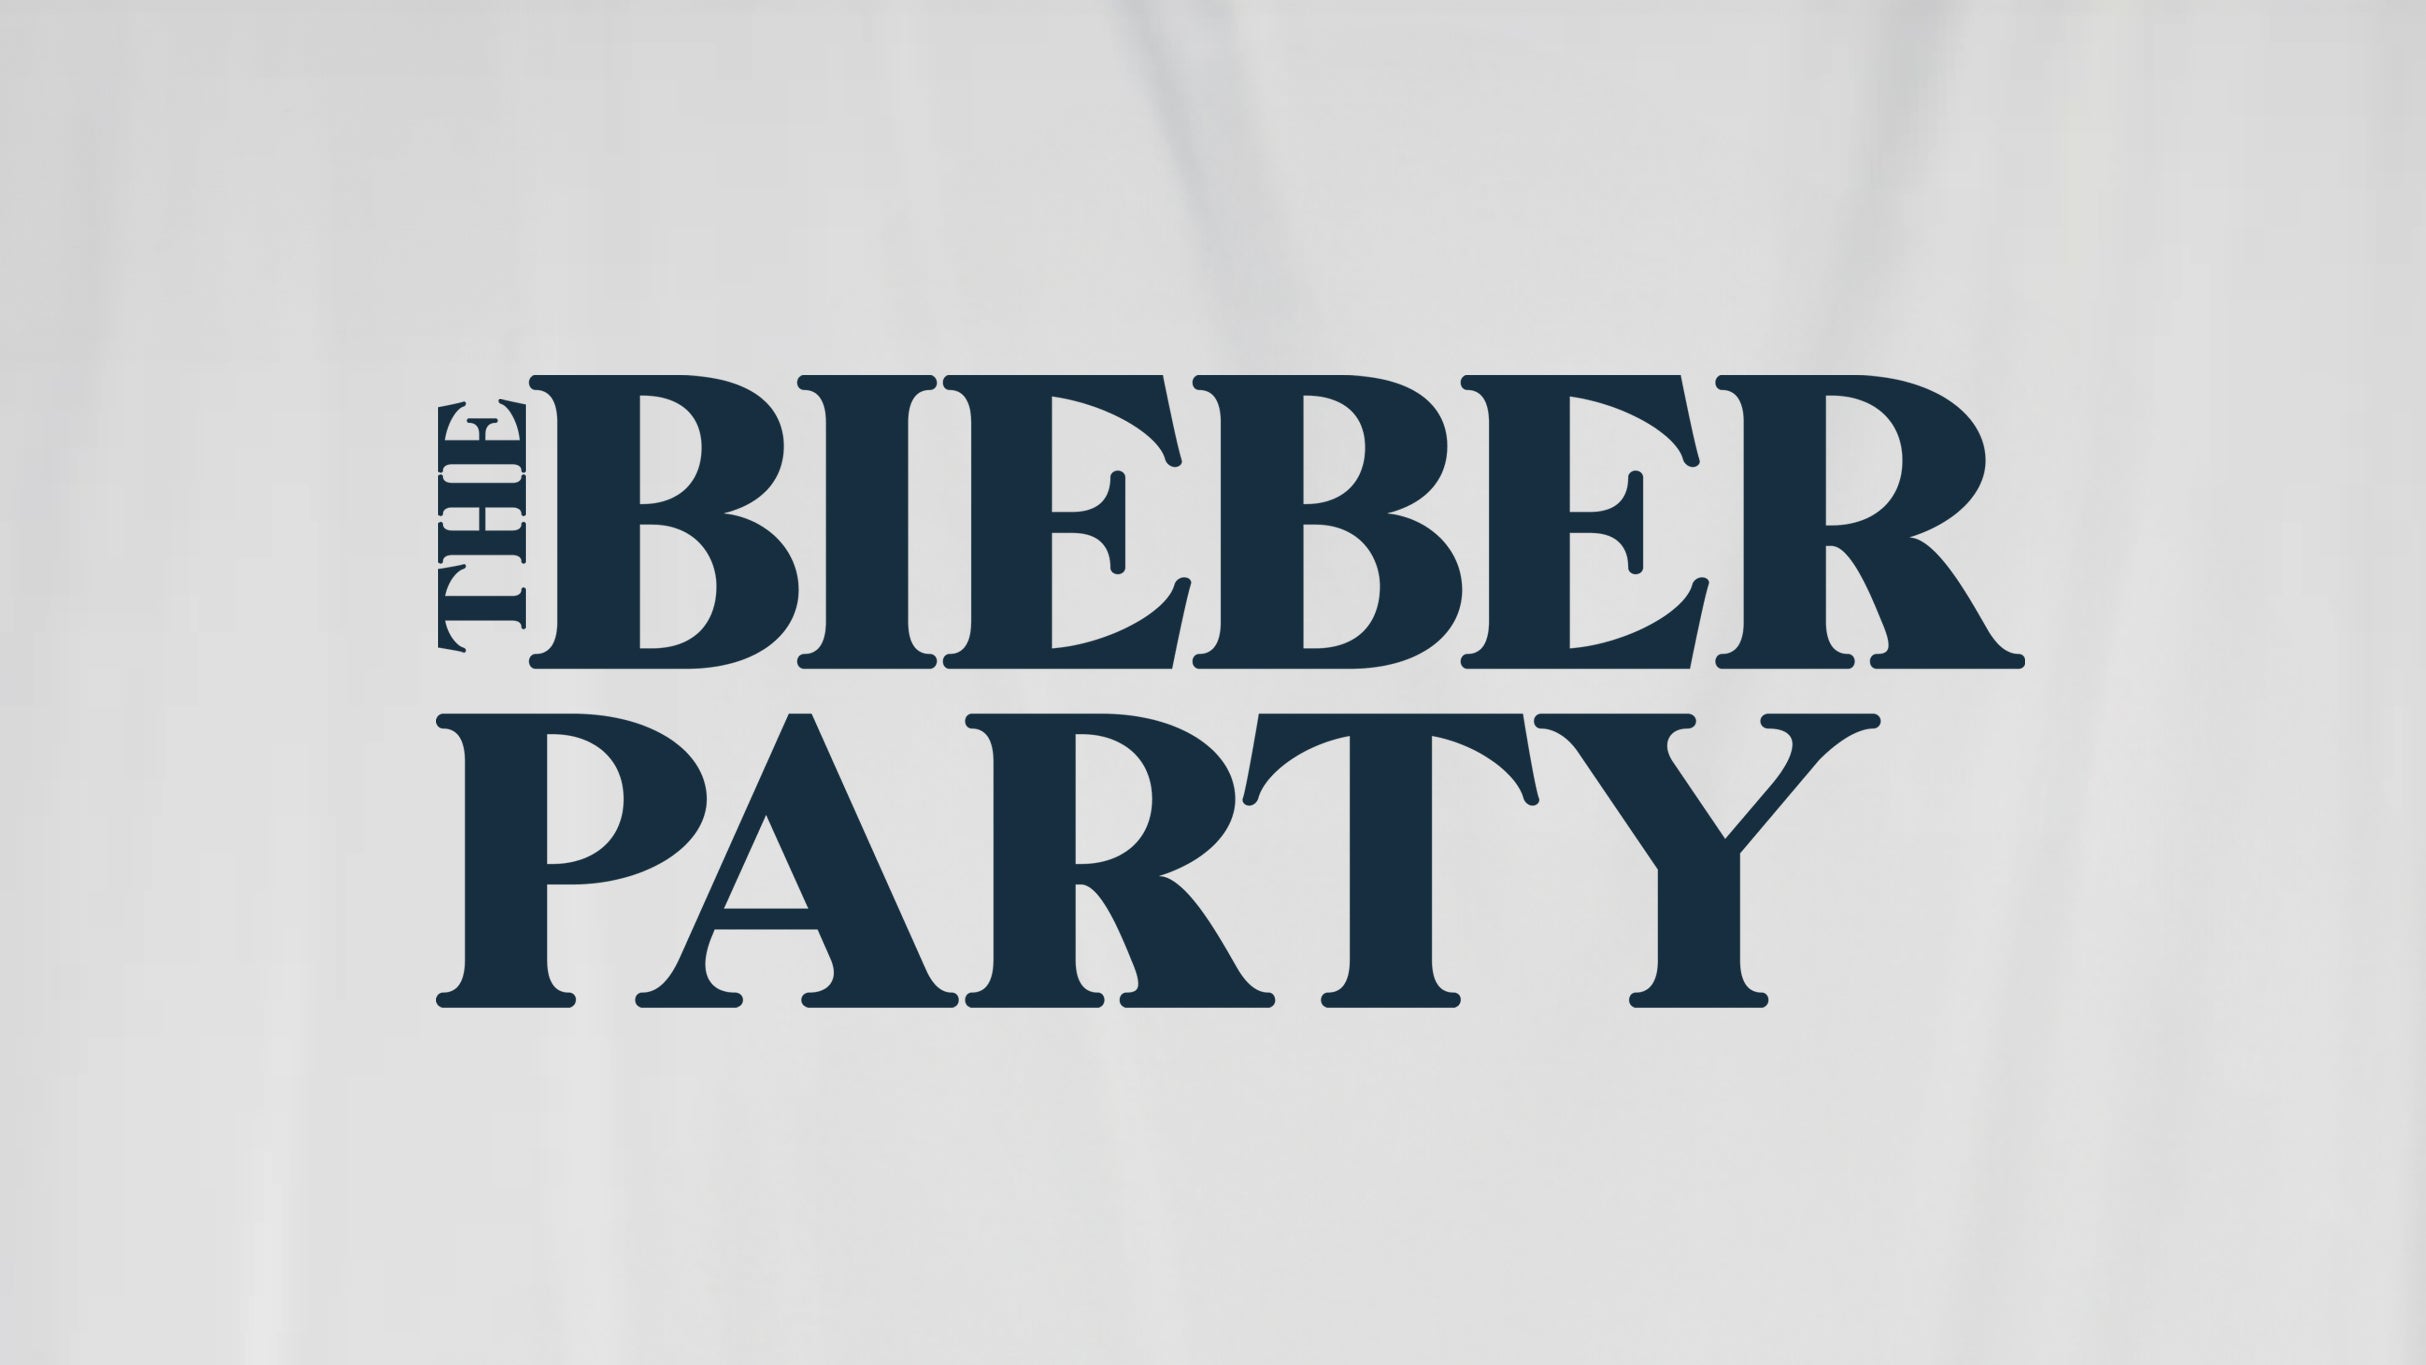 The Bieber Party: Justin Bieber Night (18+) in Wilmington promo photo for Venue presale offer code